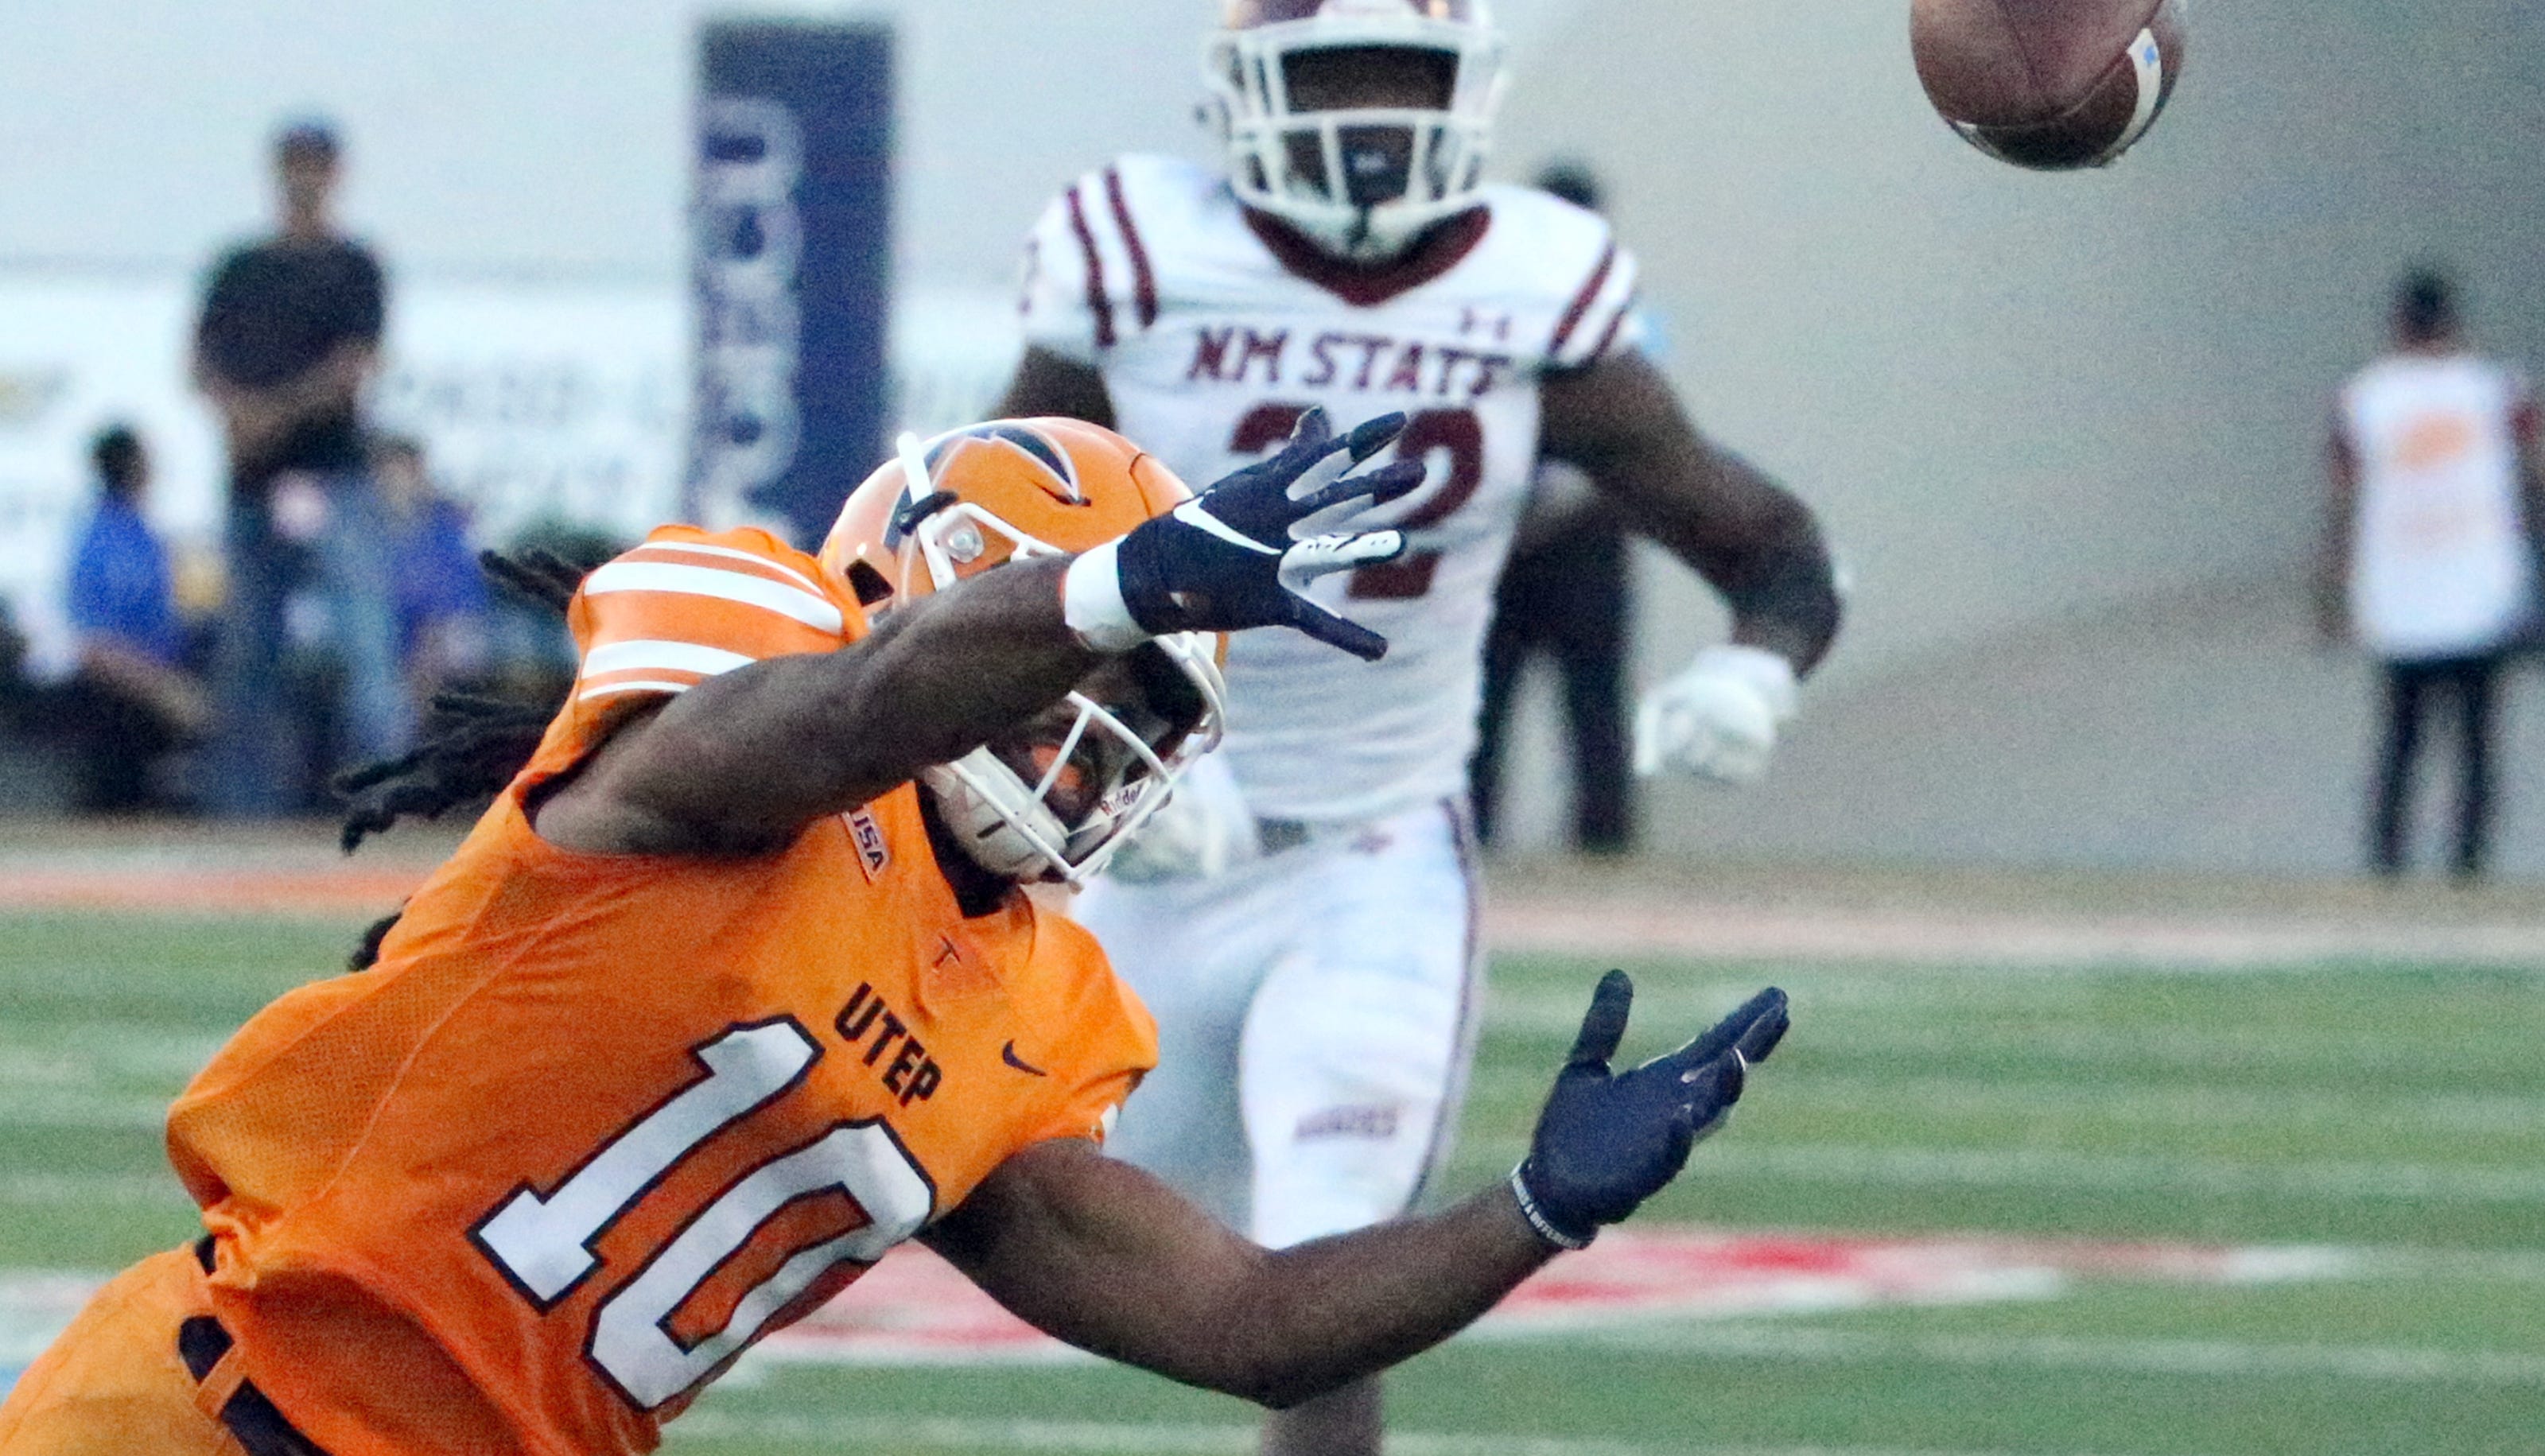 UTEP football live coverage of Miners vs. New Mexico State in the Sun Bowl